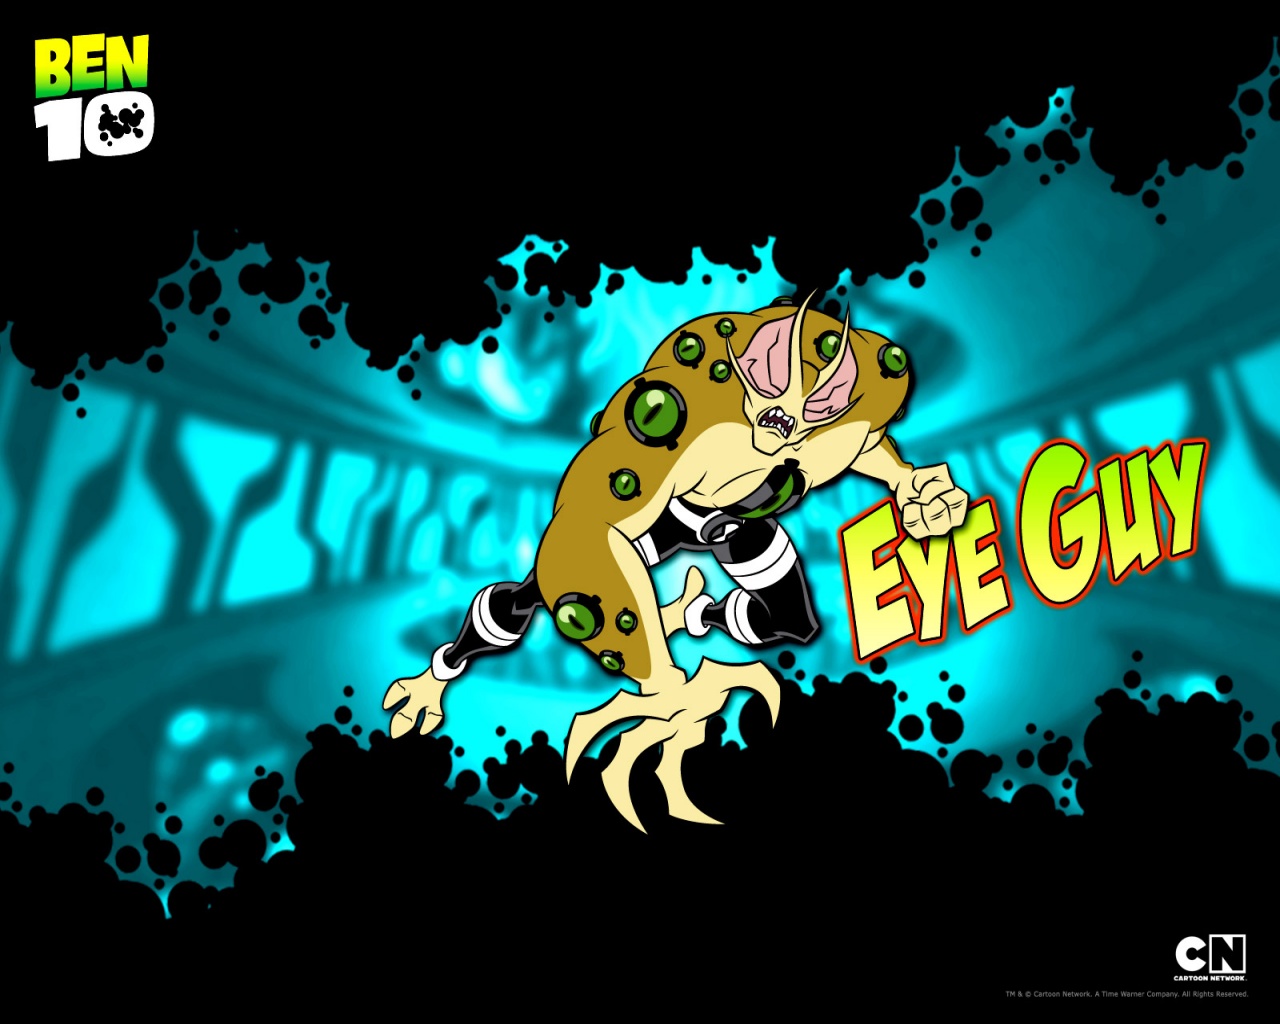 Ultimate Clipart For Desktop For Our Users - Ben10 All Ultimate Alien , HD Wallpaper & Backgrounds